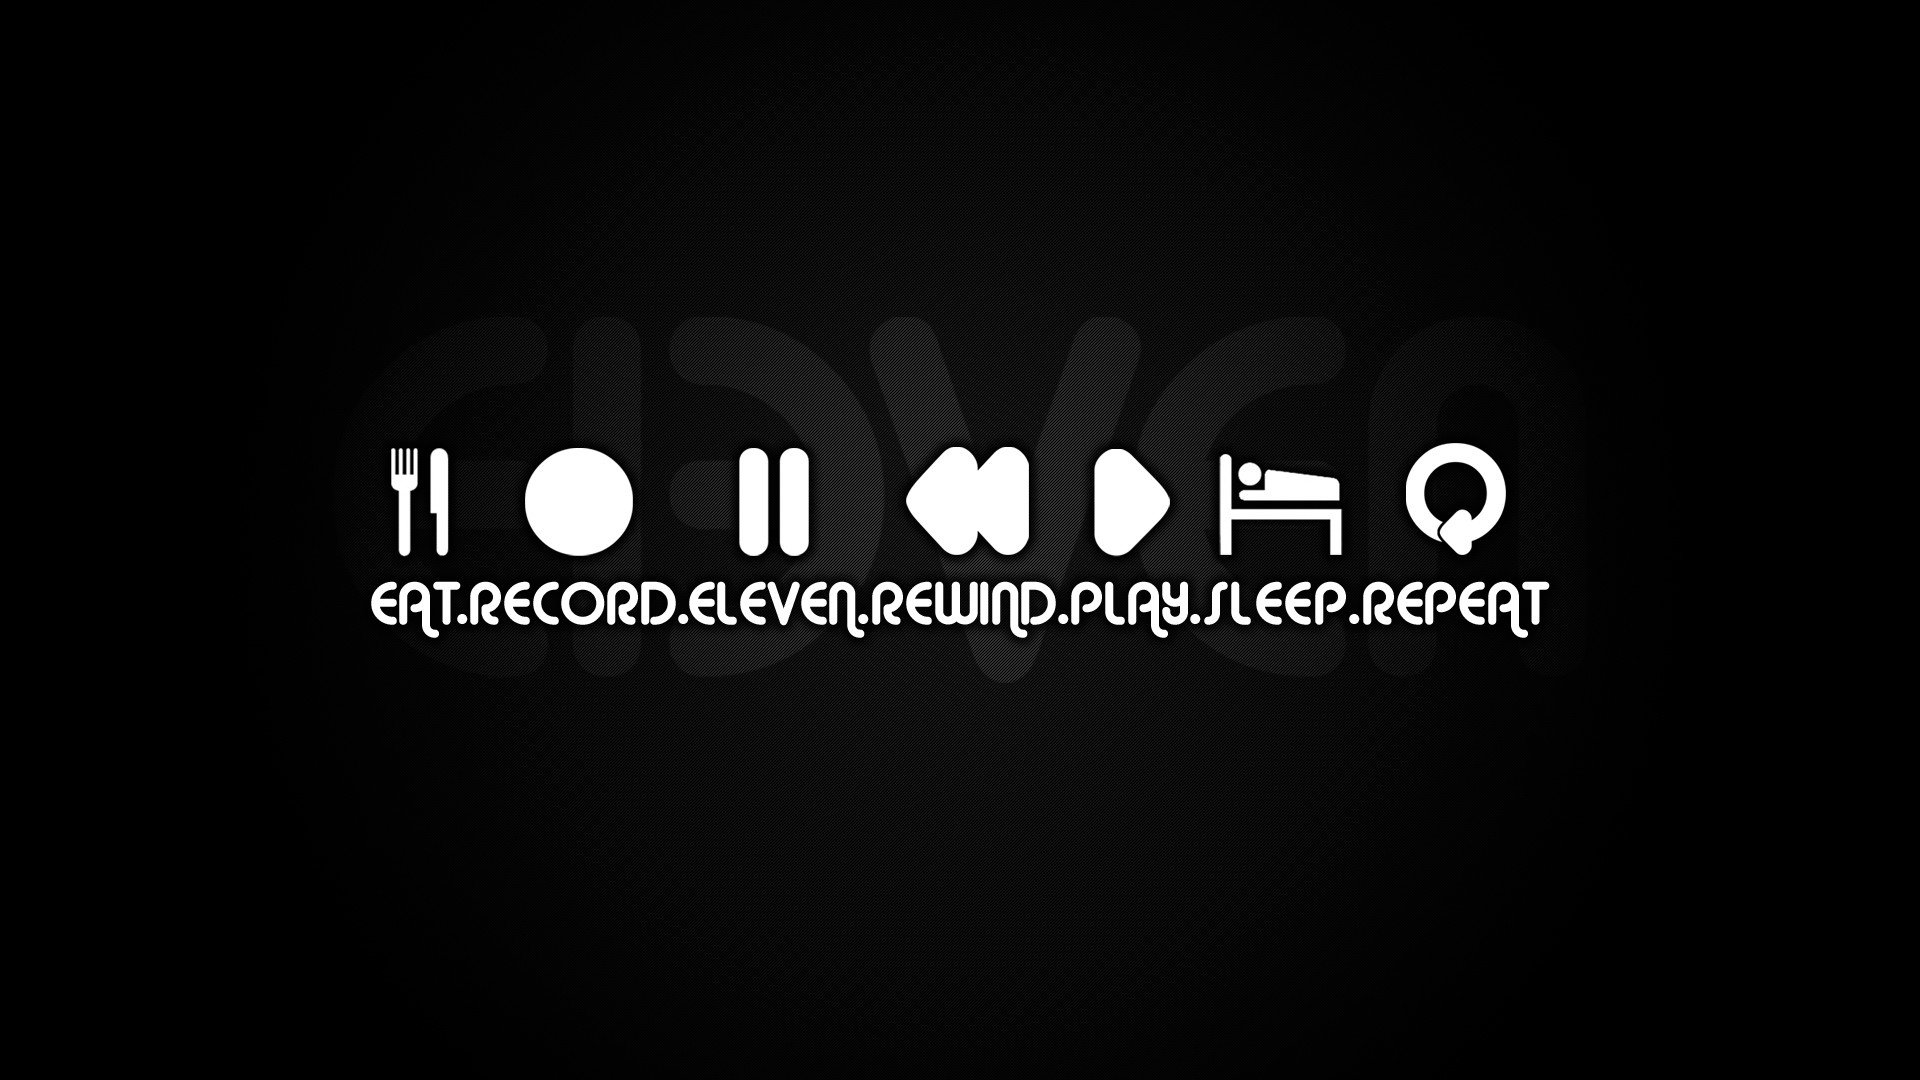 music, Record, Typography, Sleeping, Repeat Wallpaper